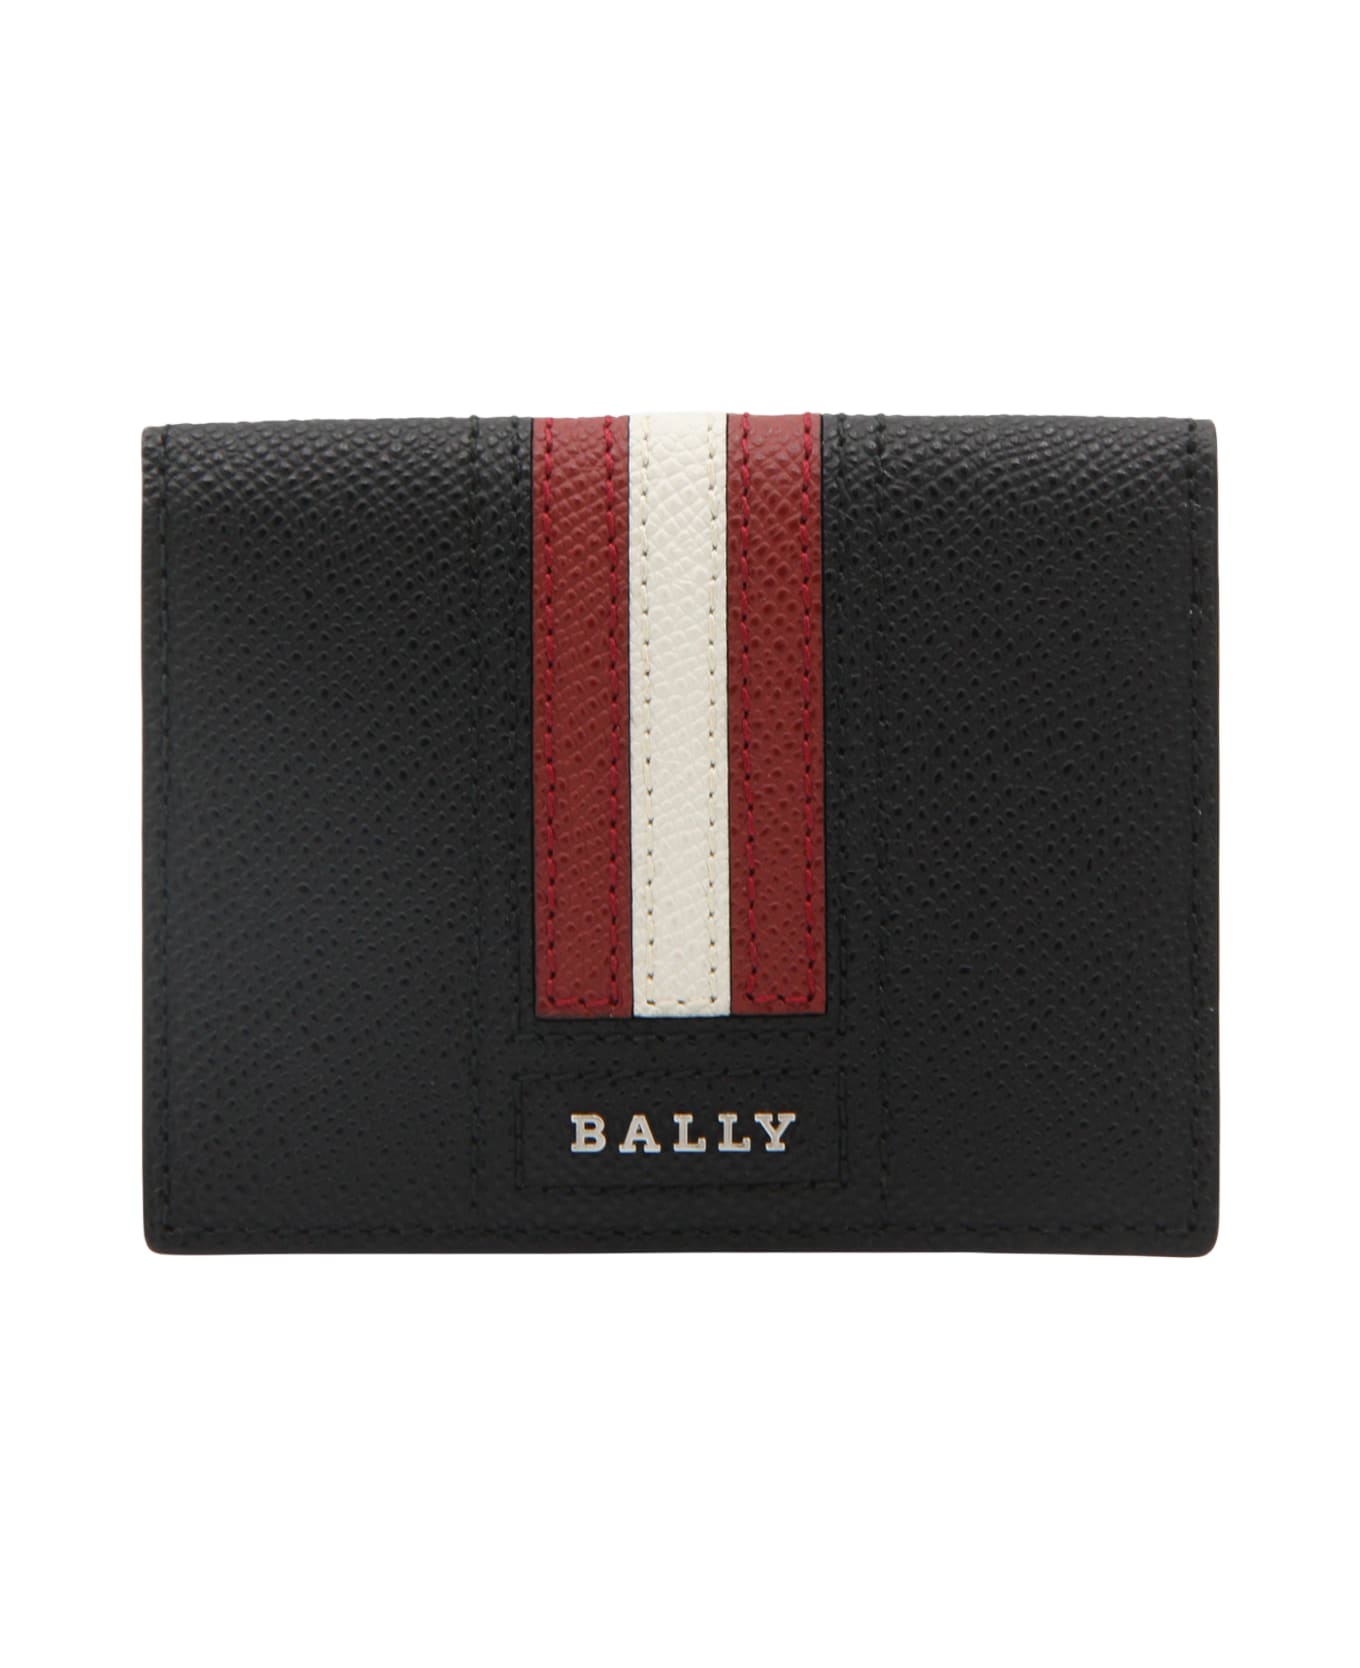 Bally Black, White And Red Leather Wallet - Black